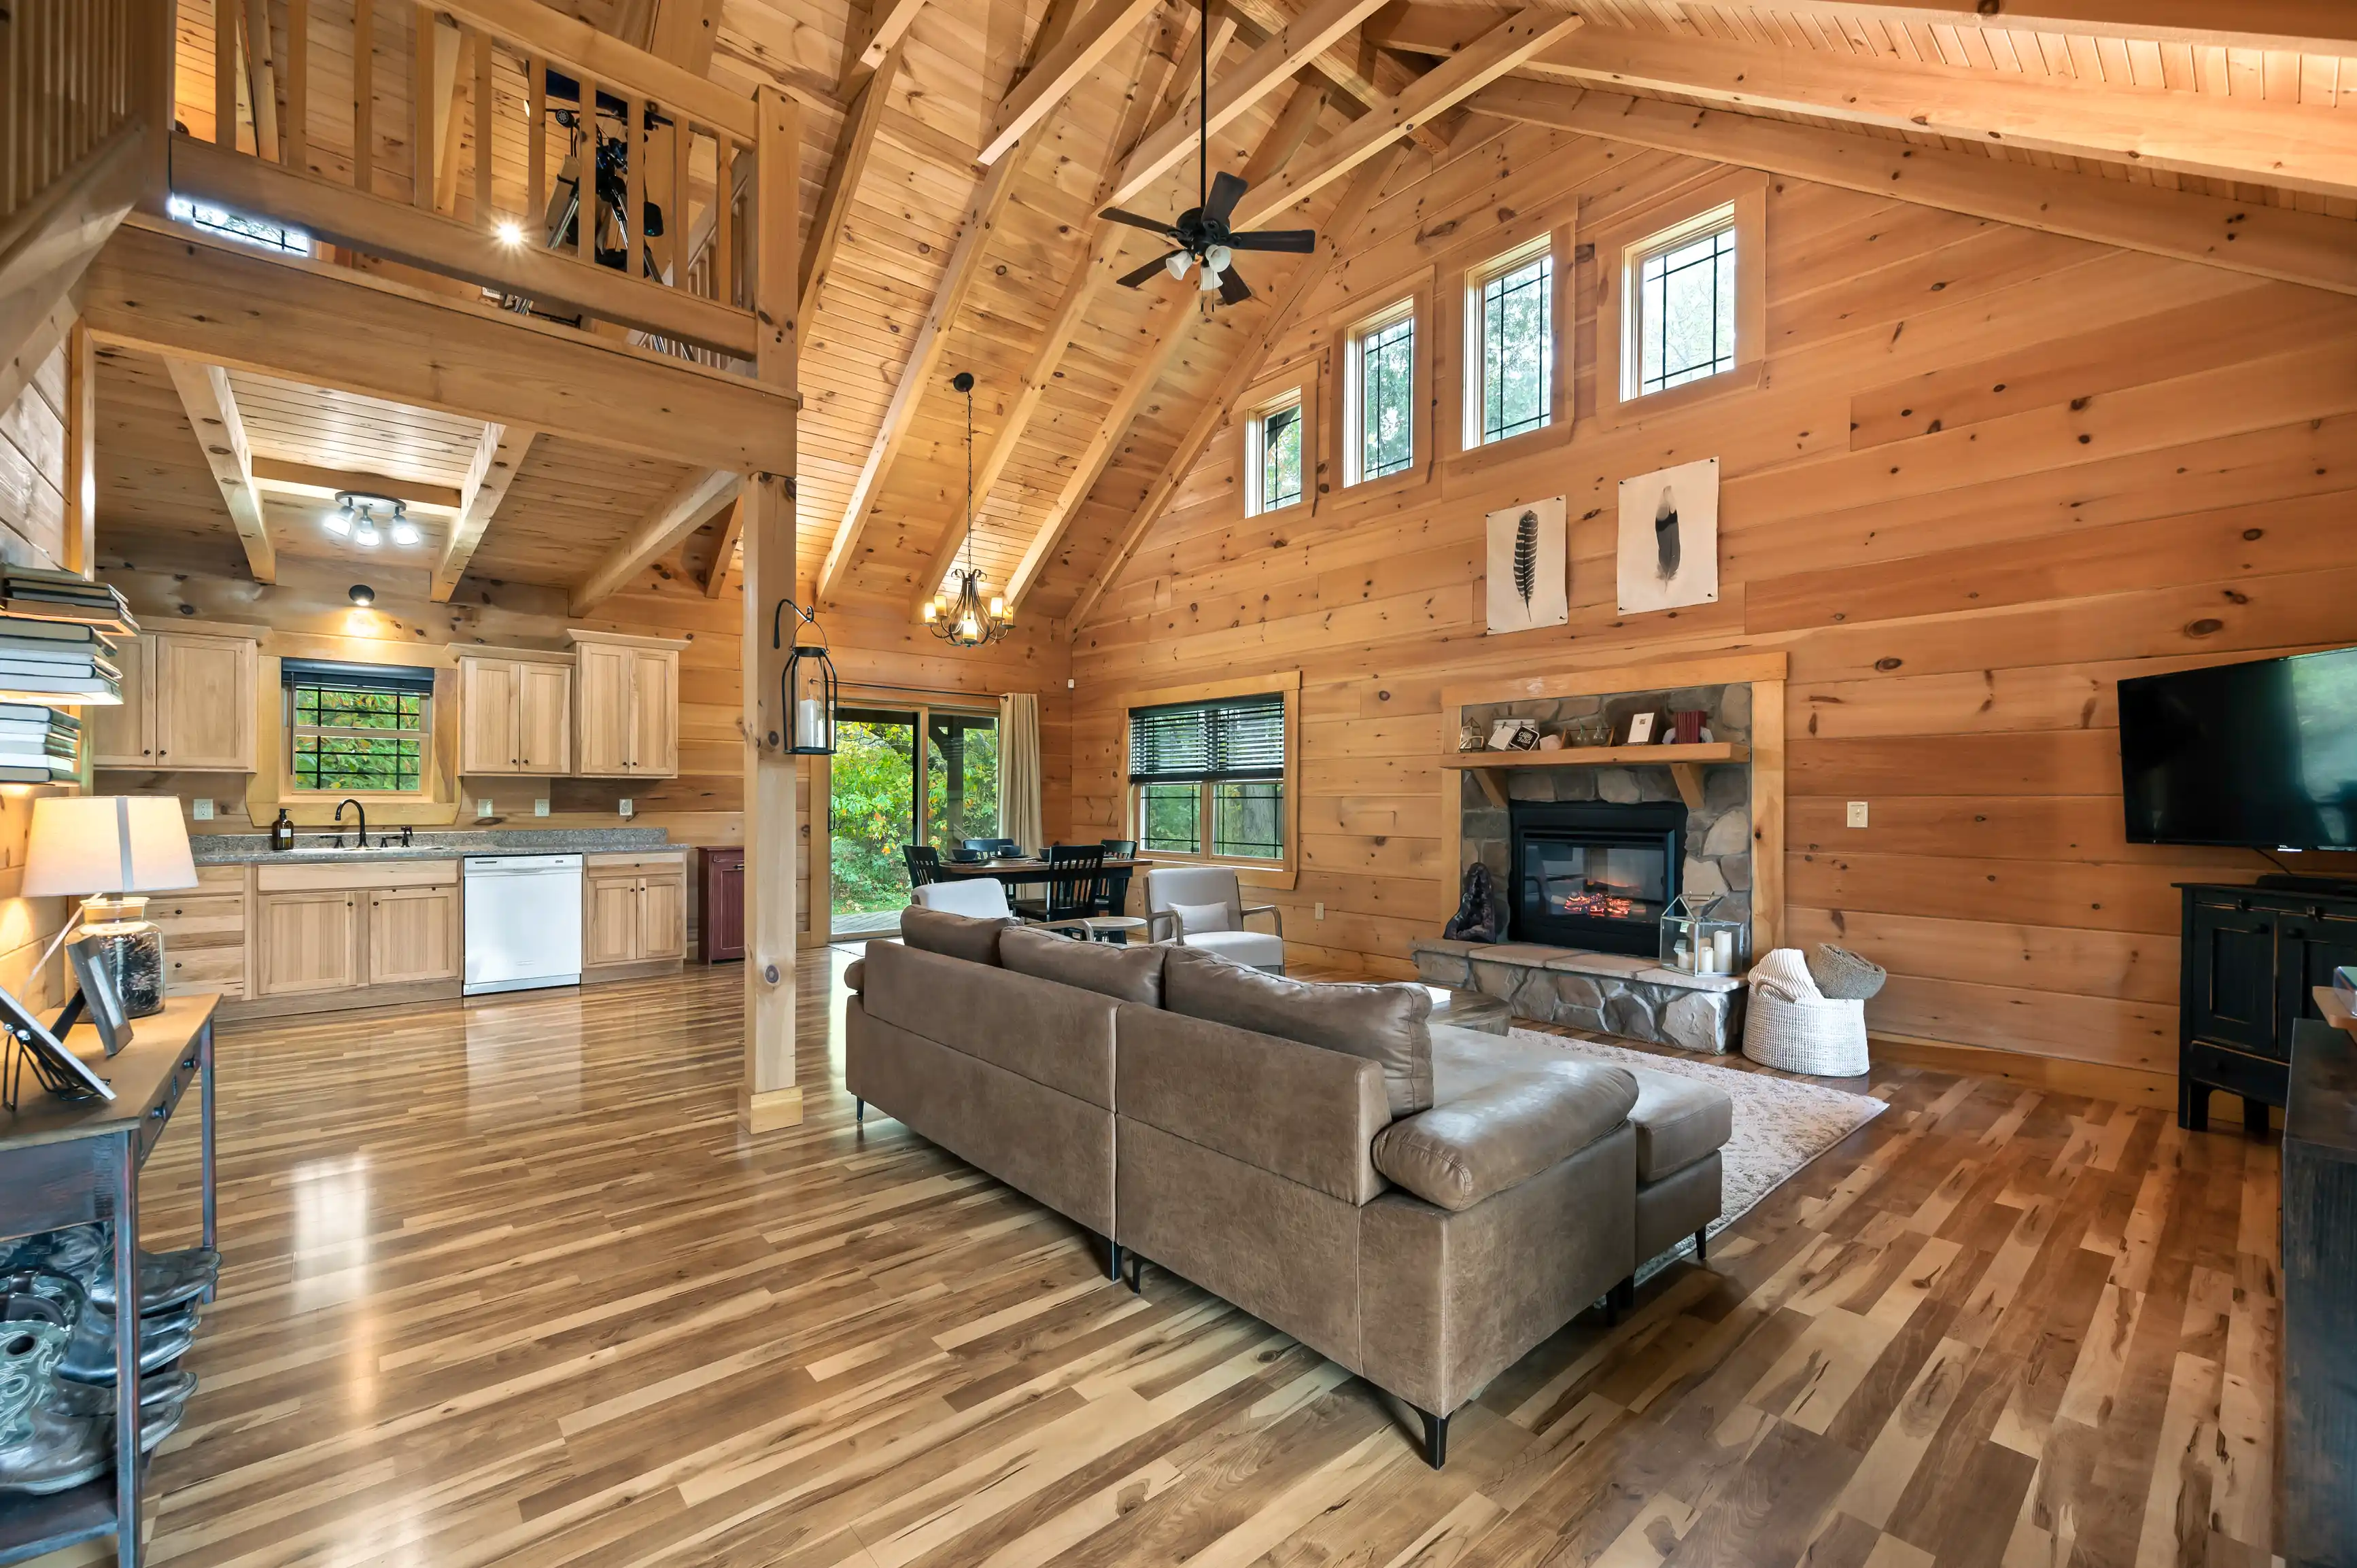 Spacious cabin interior with high vaulted ceilings, wood walls and floors, a fireplace, and a loft area, furnished with a sectional sofa, a dining set, and a kitchen with modern appliances.